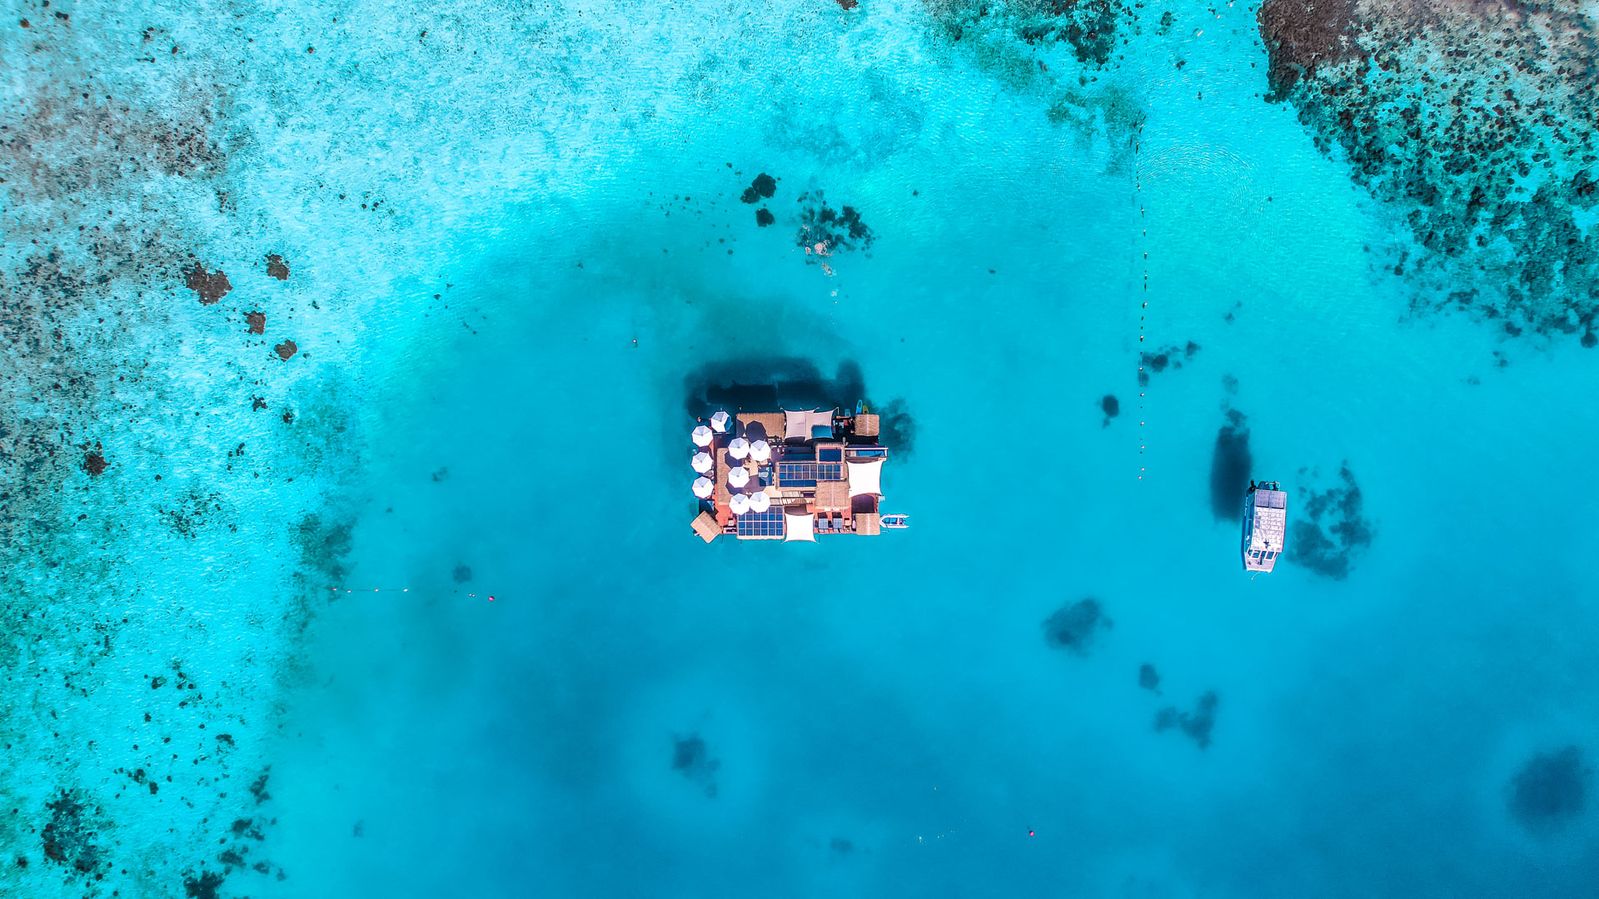 Bird's eye view of Seventh Heaven Raft floating in the Pacific Ocean